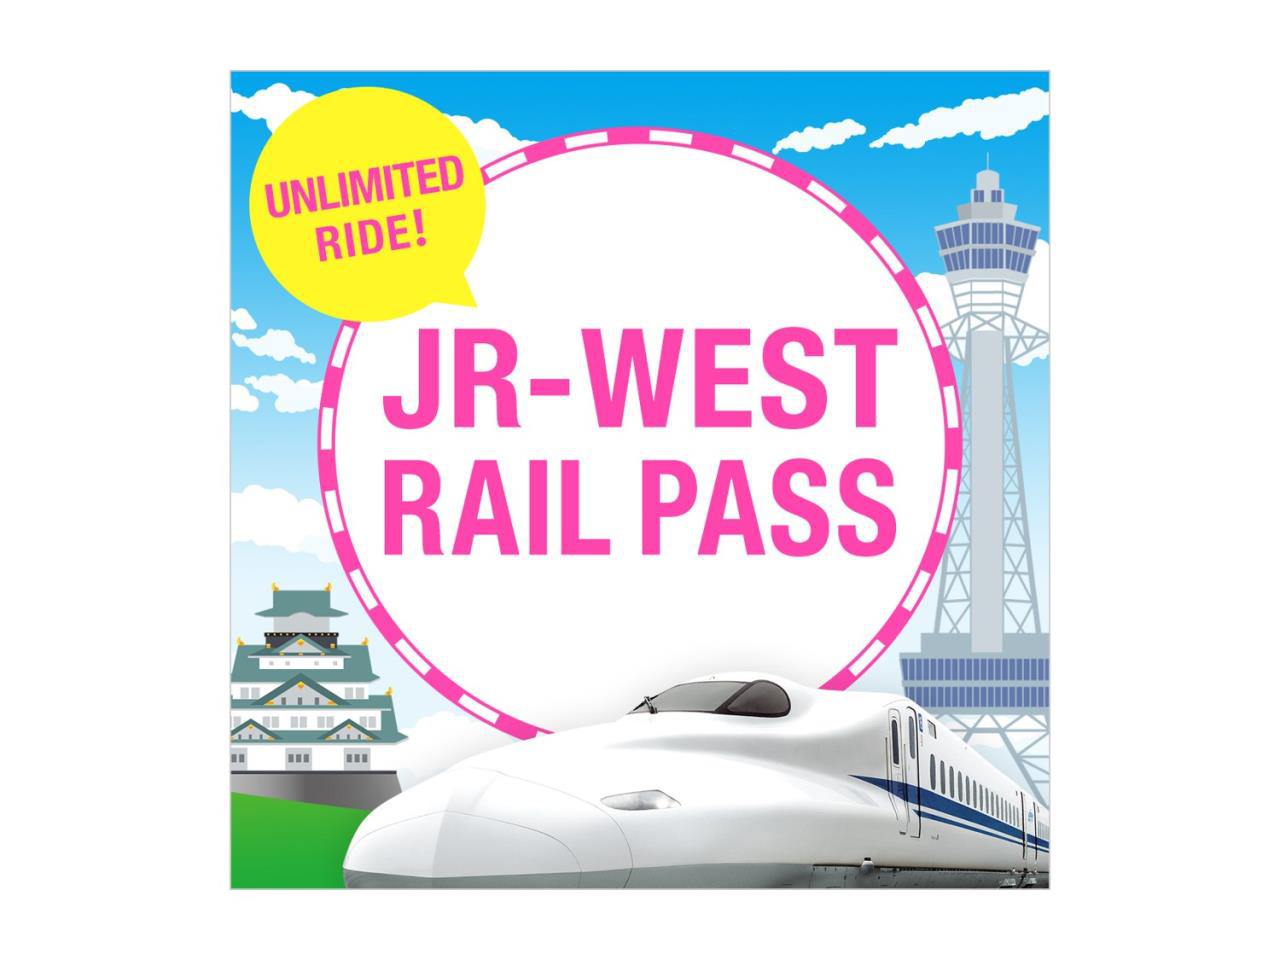 Value Pass Information for a More Fun-Filled Kansai Trip!